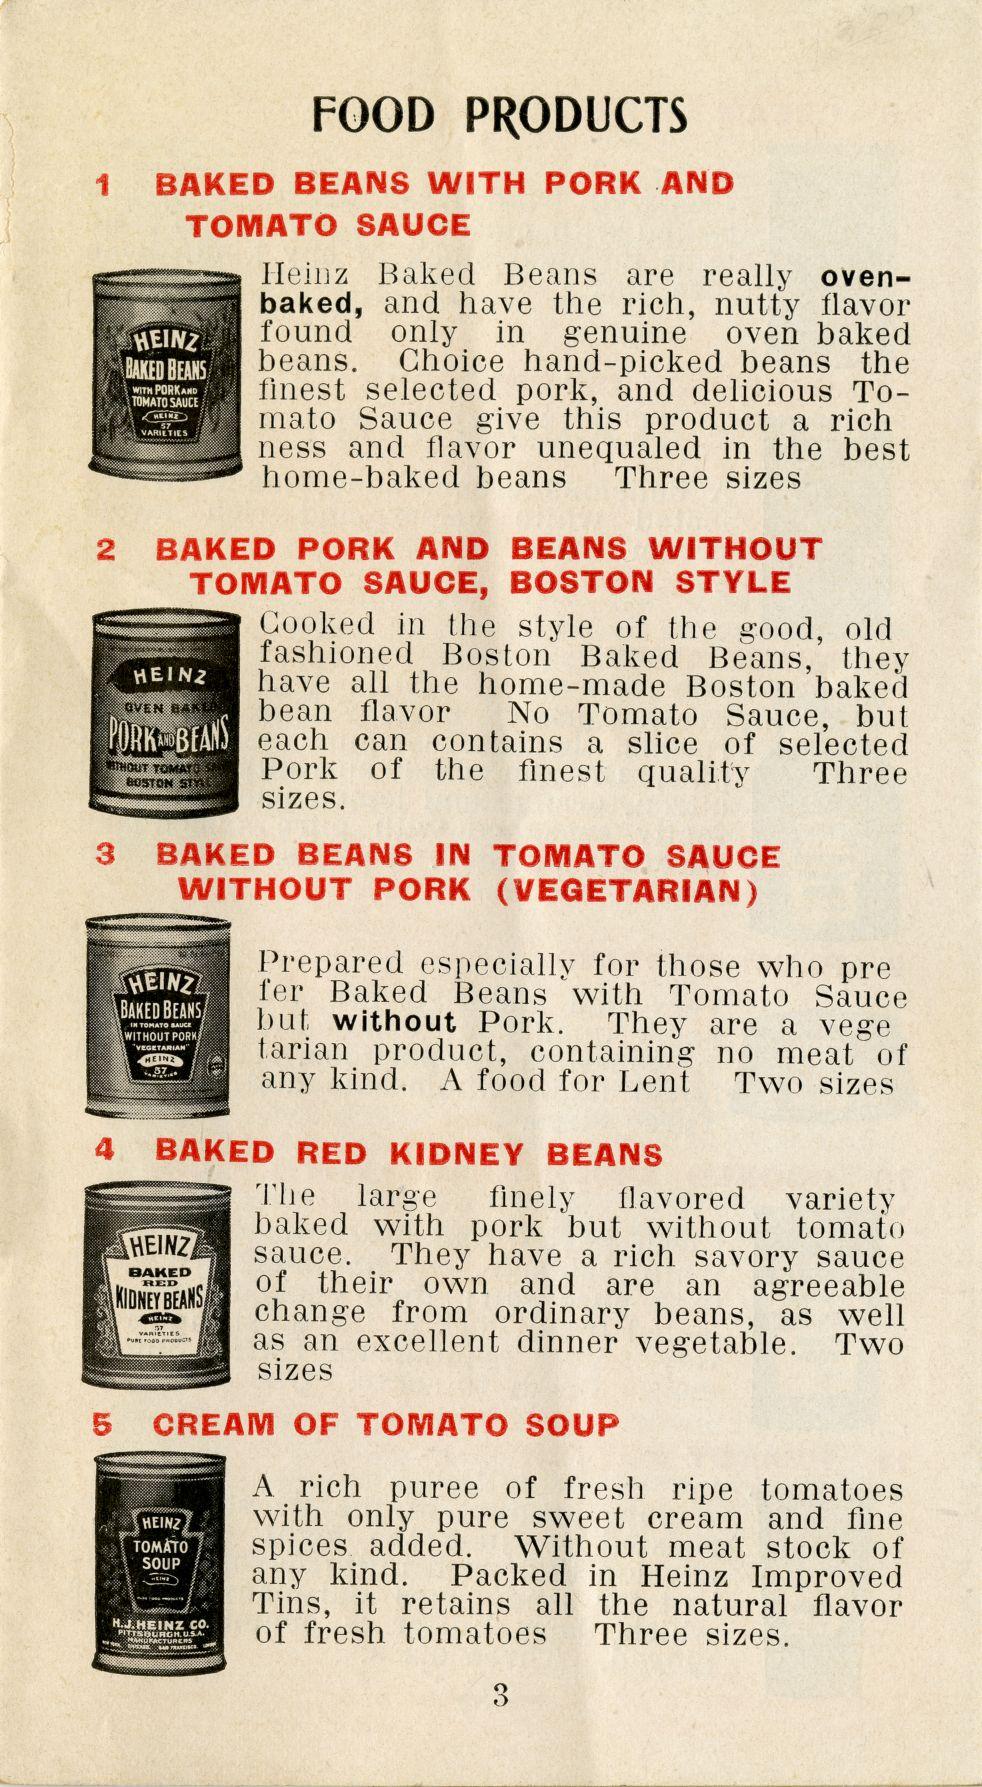 FOOD PRODUCTS 1 BAKED BEANS WITH PORK AMD TOMATO SAUOE Heinz Baked Beans are really ovenbaked, and have the rich, nutty flavor found only in genuine oven baked beans.